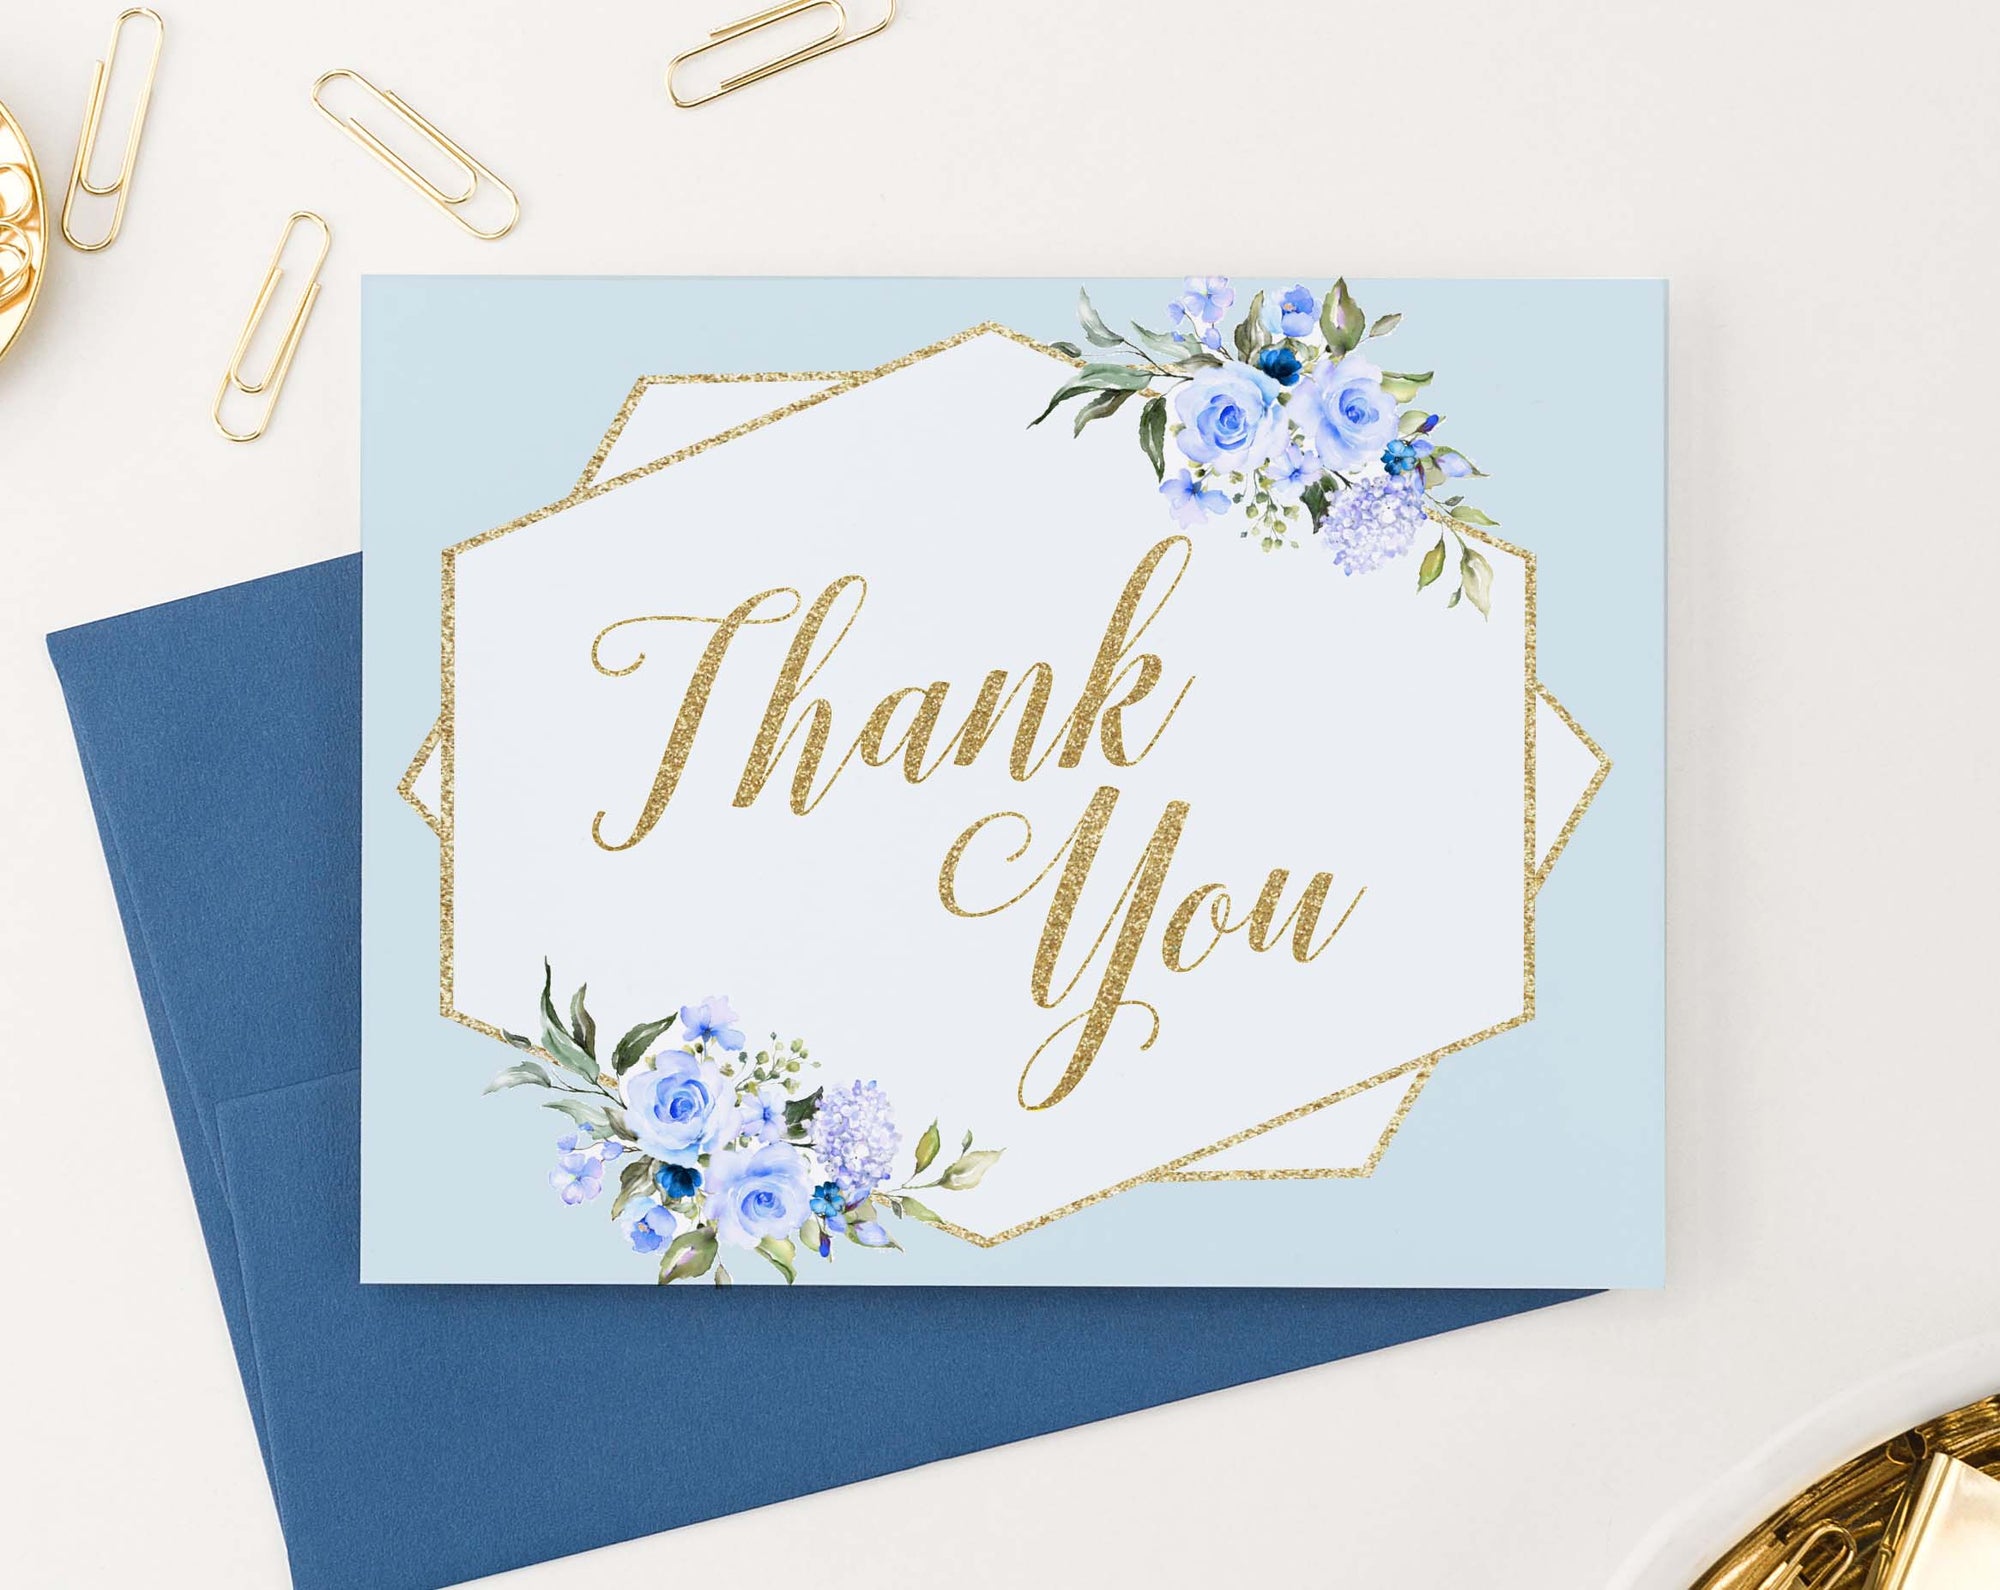 TY032 blue elegant floral thank you notes for baby shower gold script